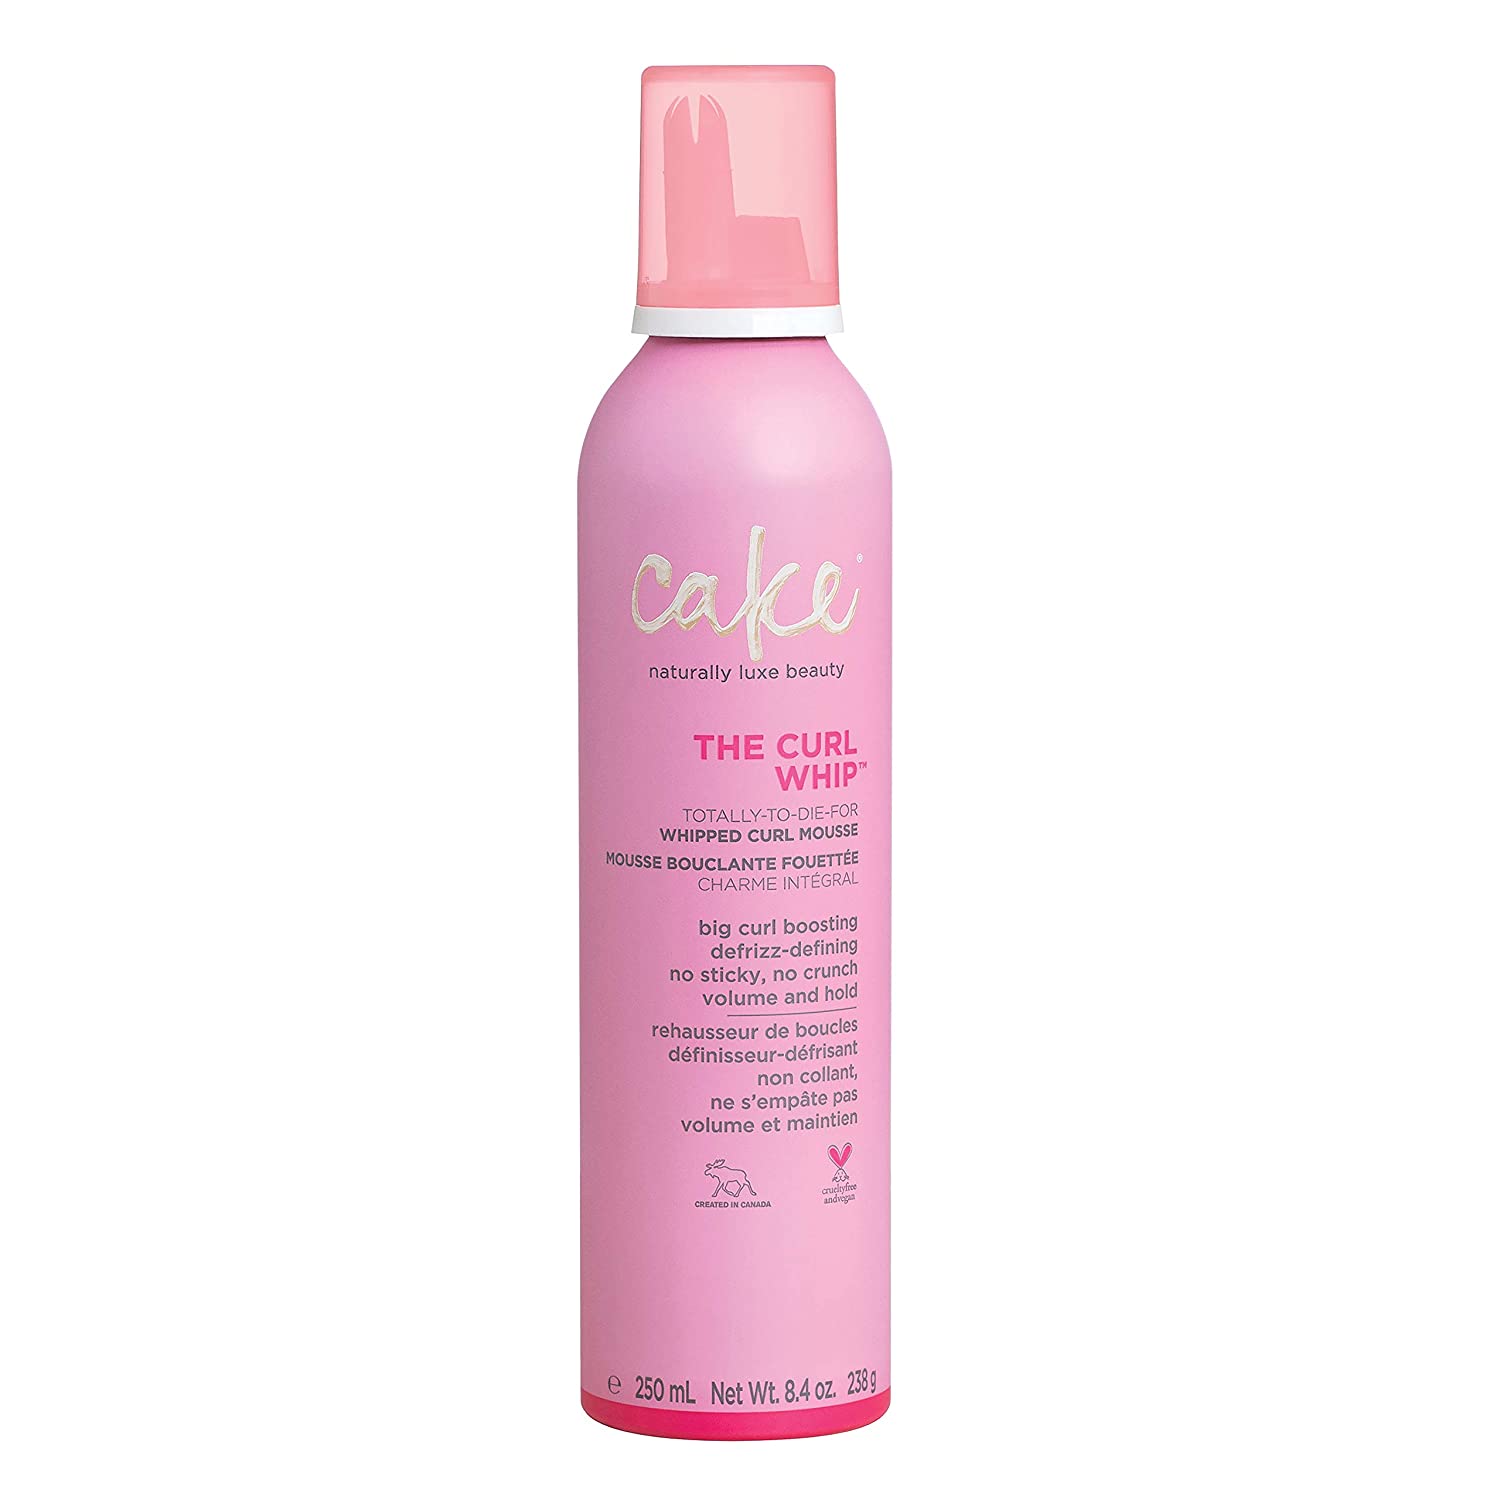 Cake Beauty The sugar reset purifying hair rinse Reviews | abillion